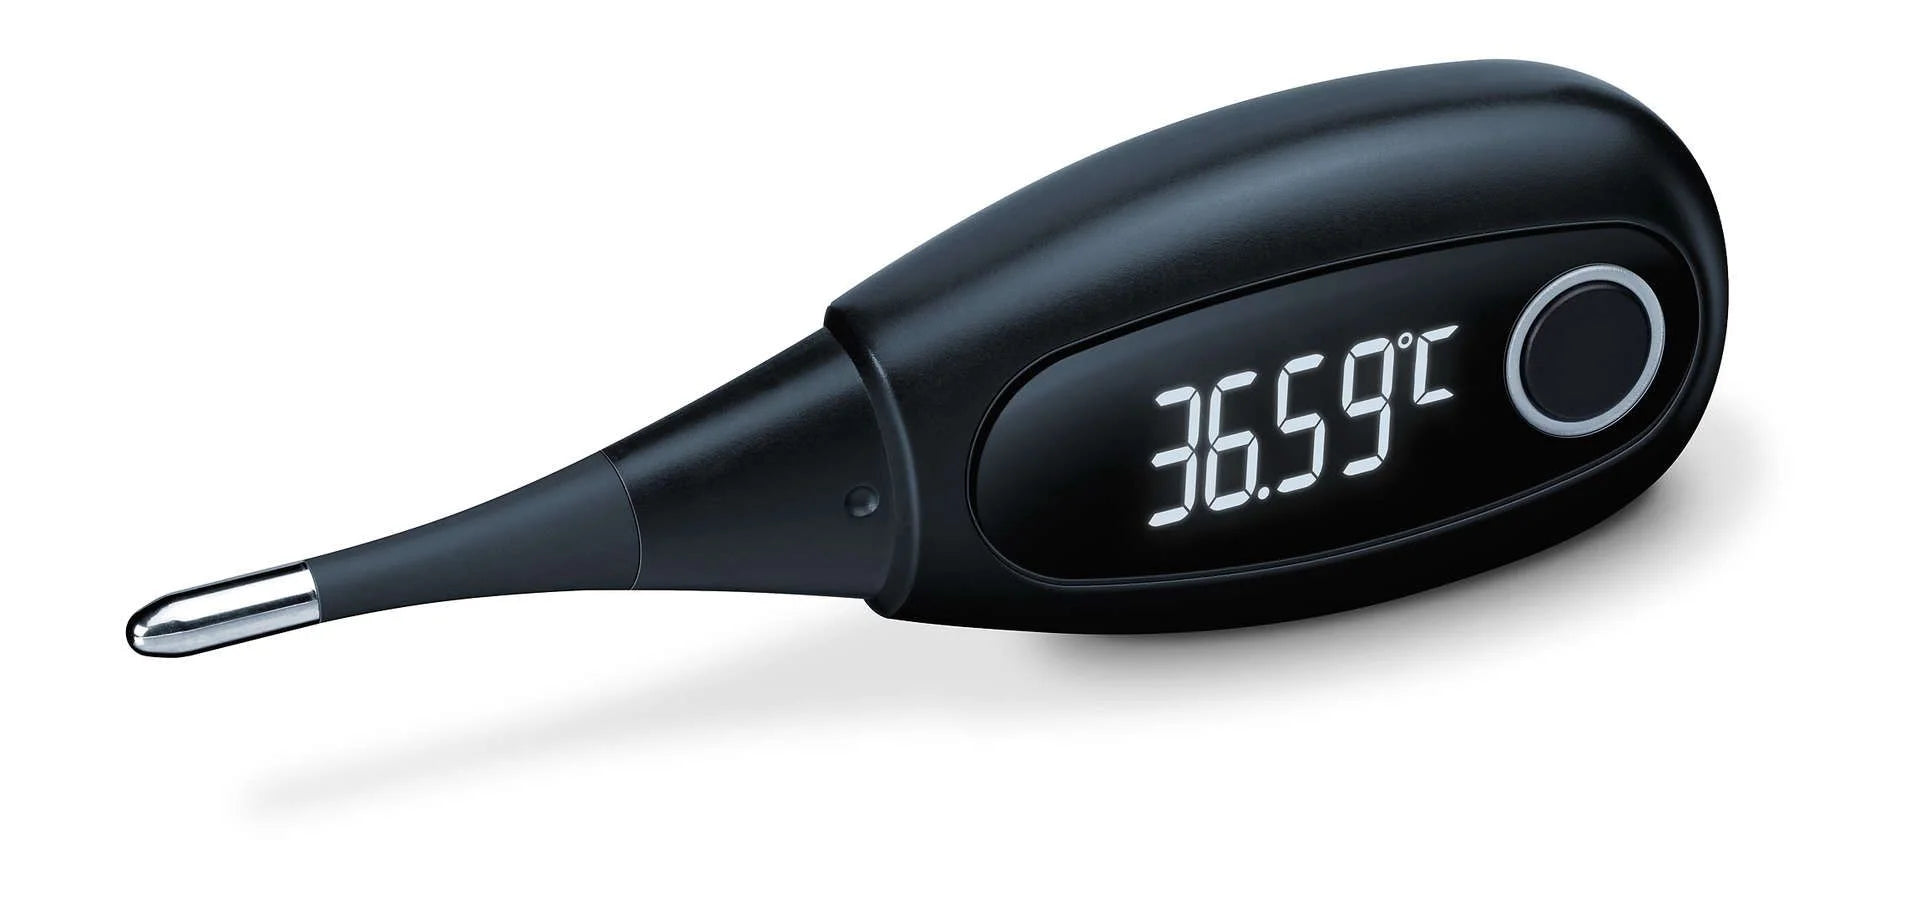 Ovulation Thermometer With Bluetooth